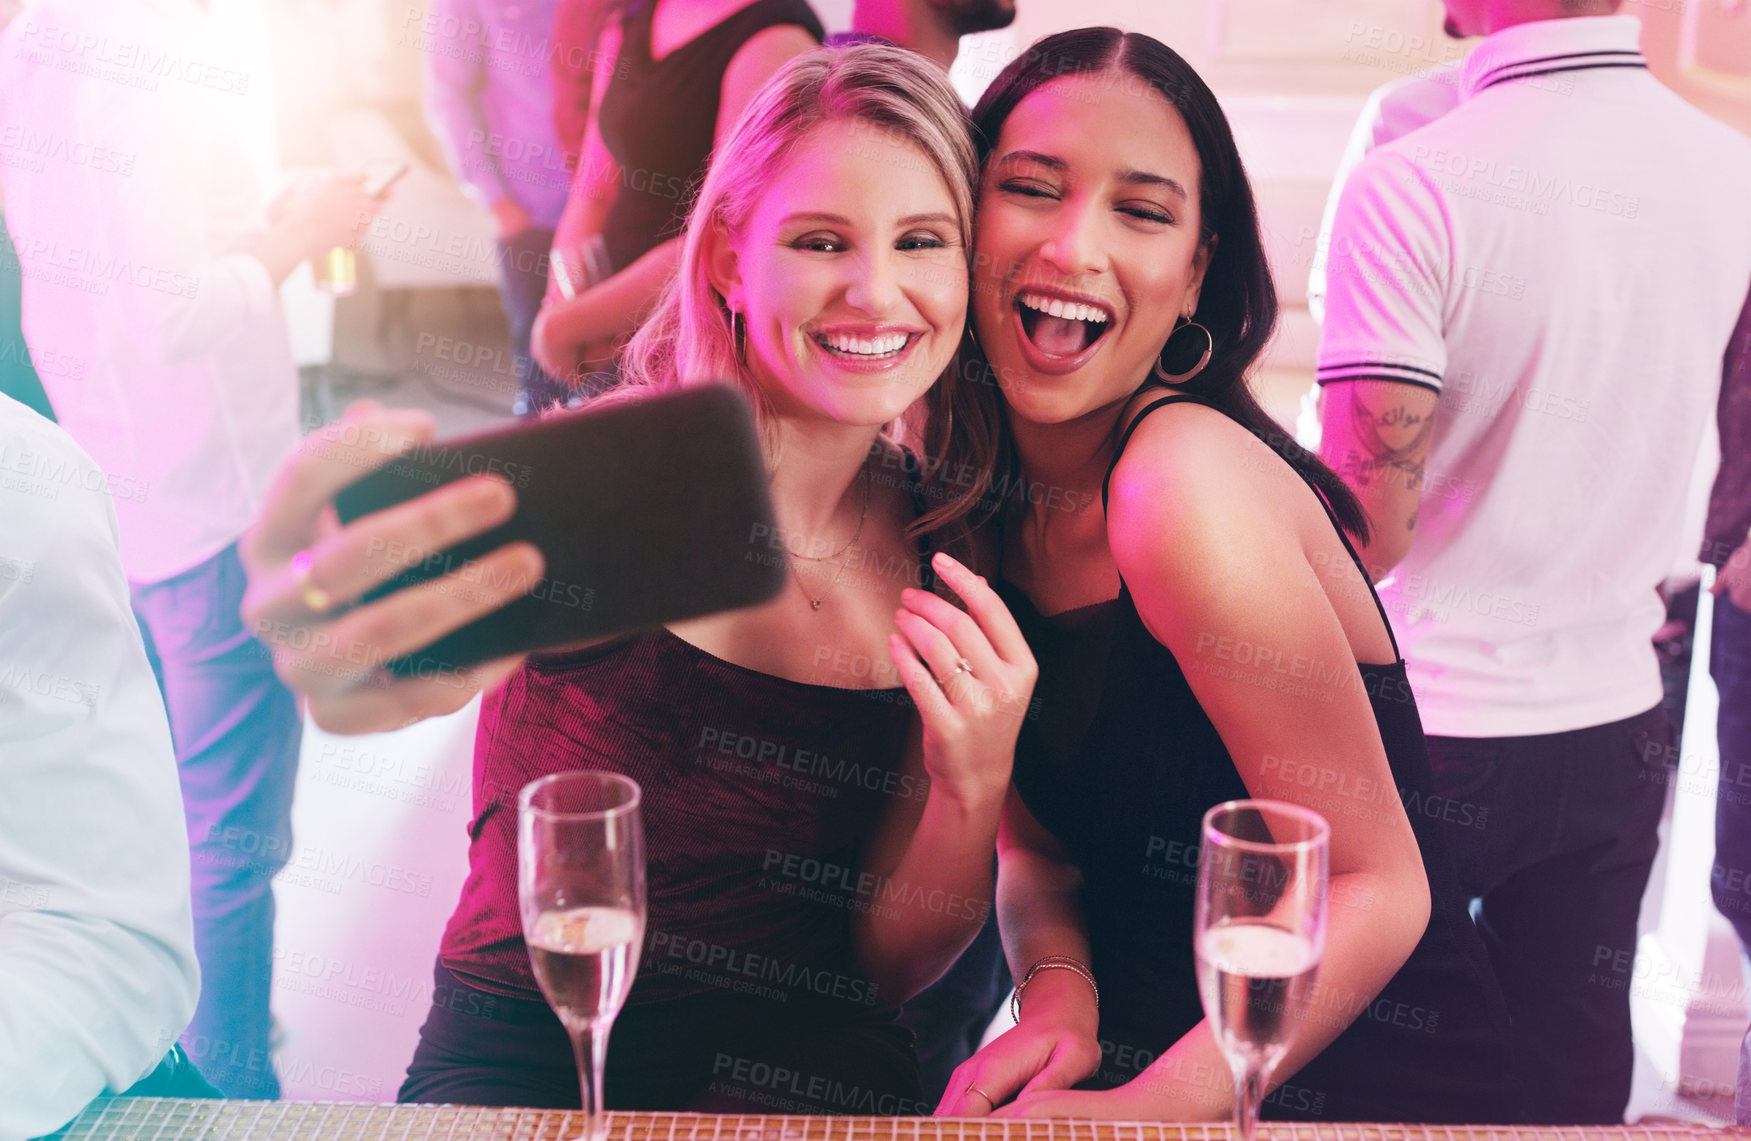 Buy stock photo Shot of two young women taking a selfie together in a nightclub